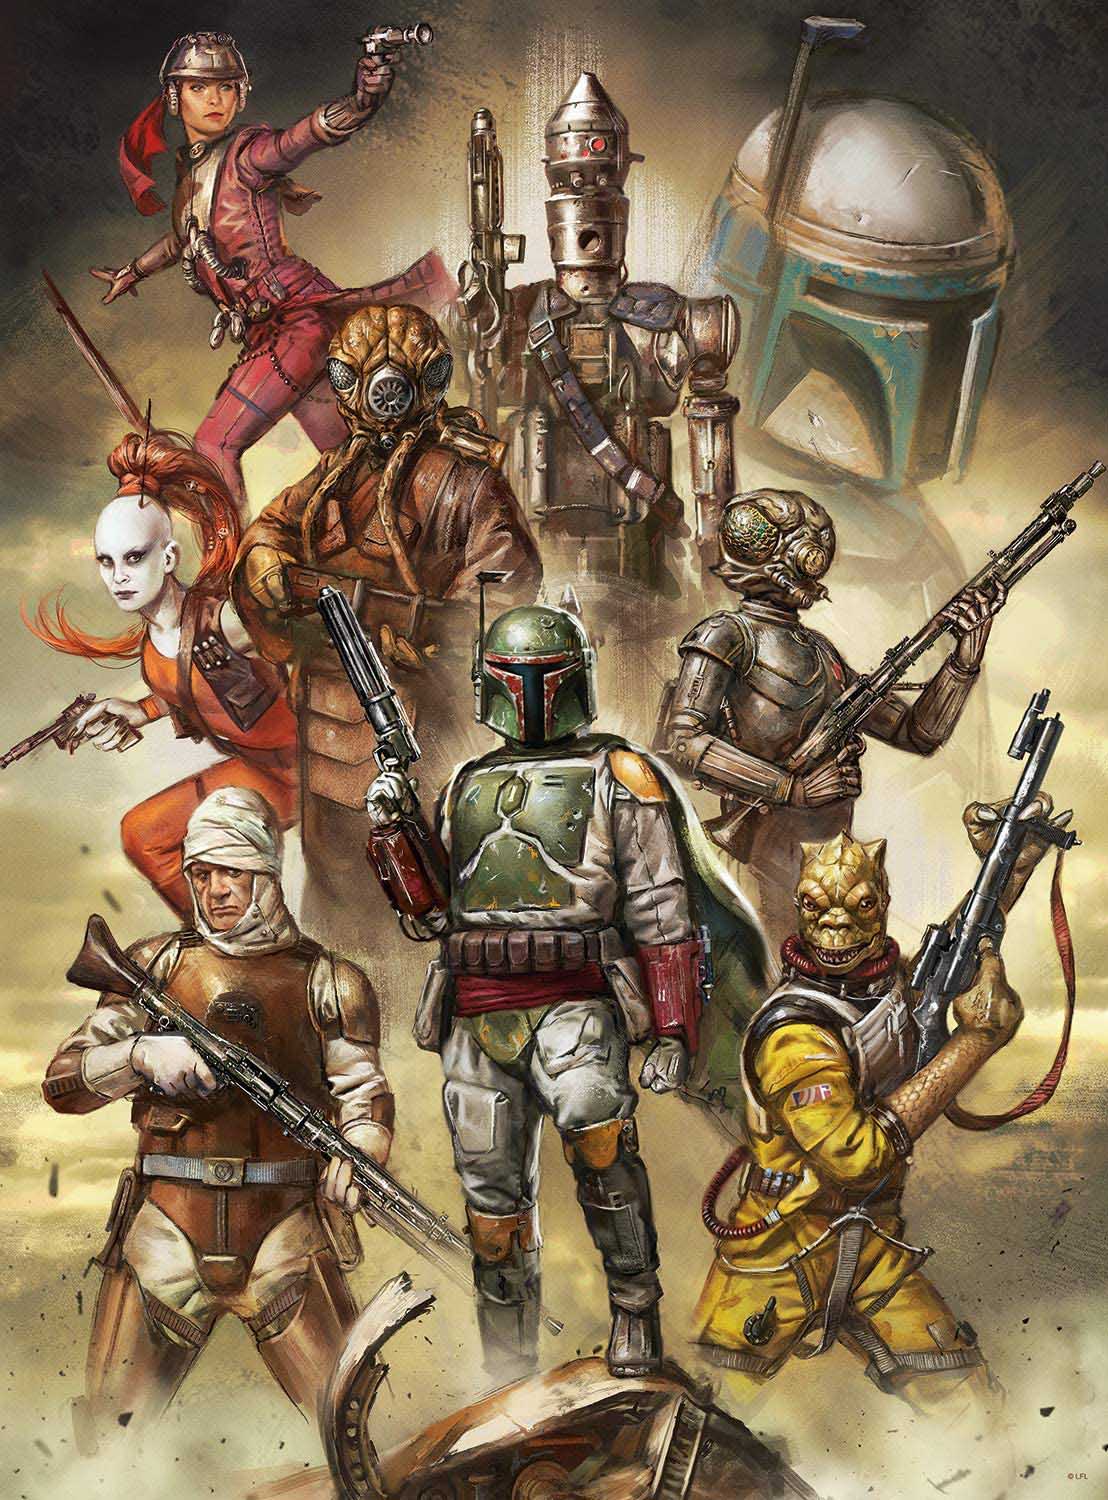 Star Wars Video Game Cover Collage Star Wars Jigsaw Puzzle By Buffalo Games